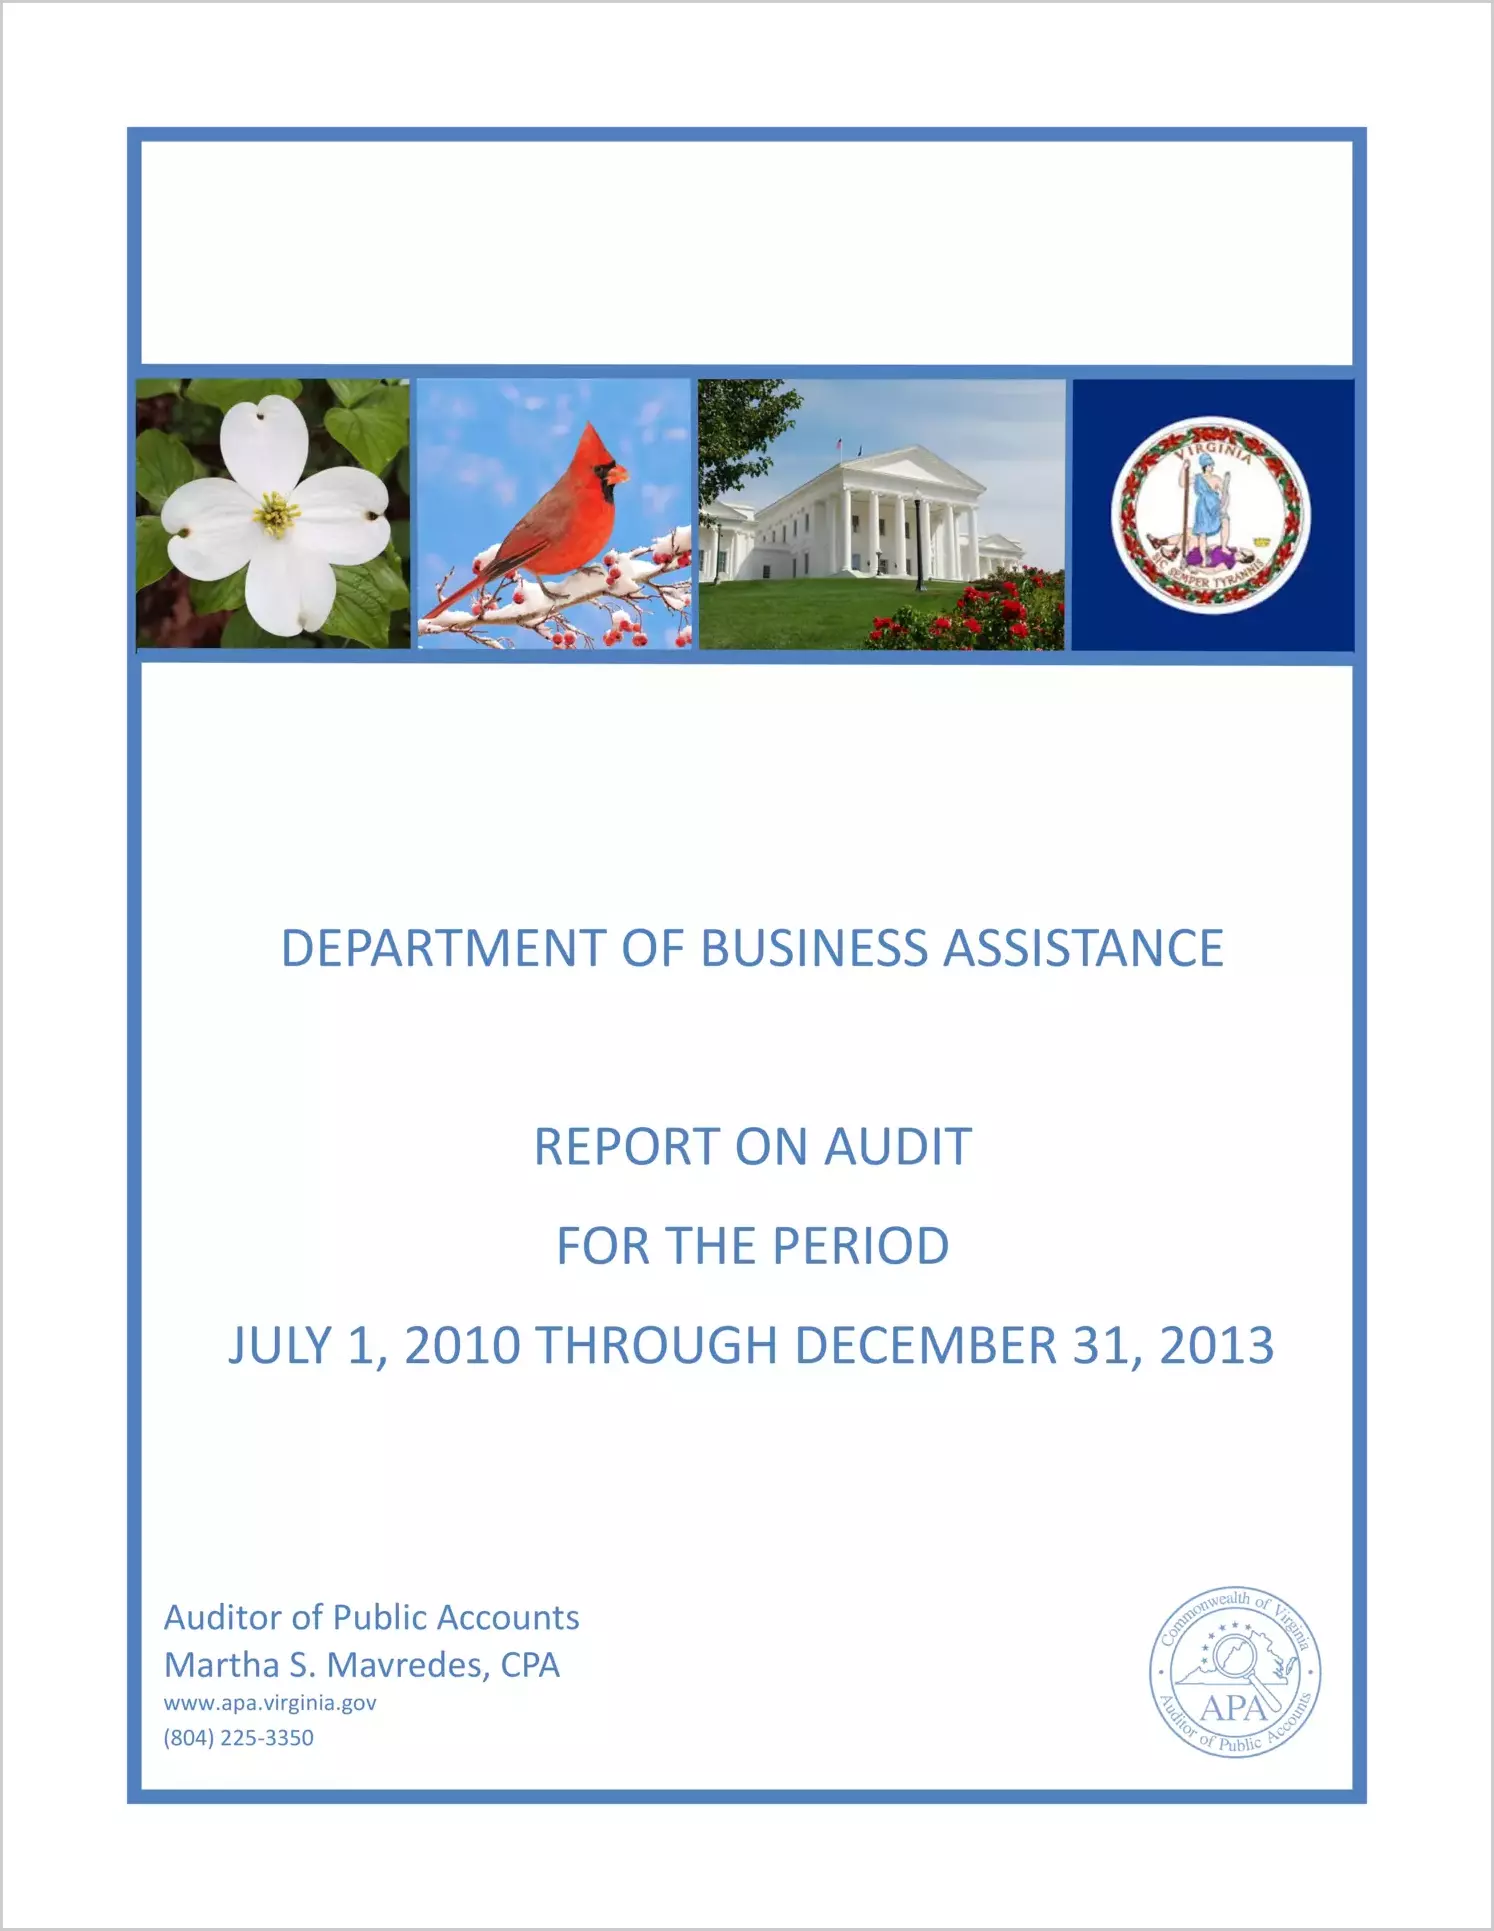 Department of Business Assistance Report on Audit for the period July 1, 2010 through December 31, 2013